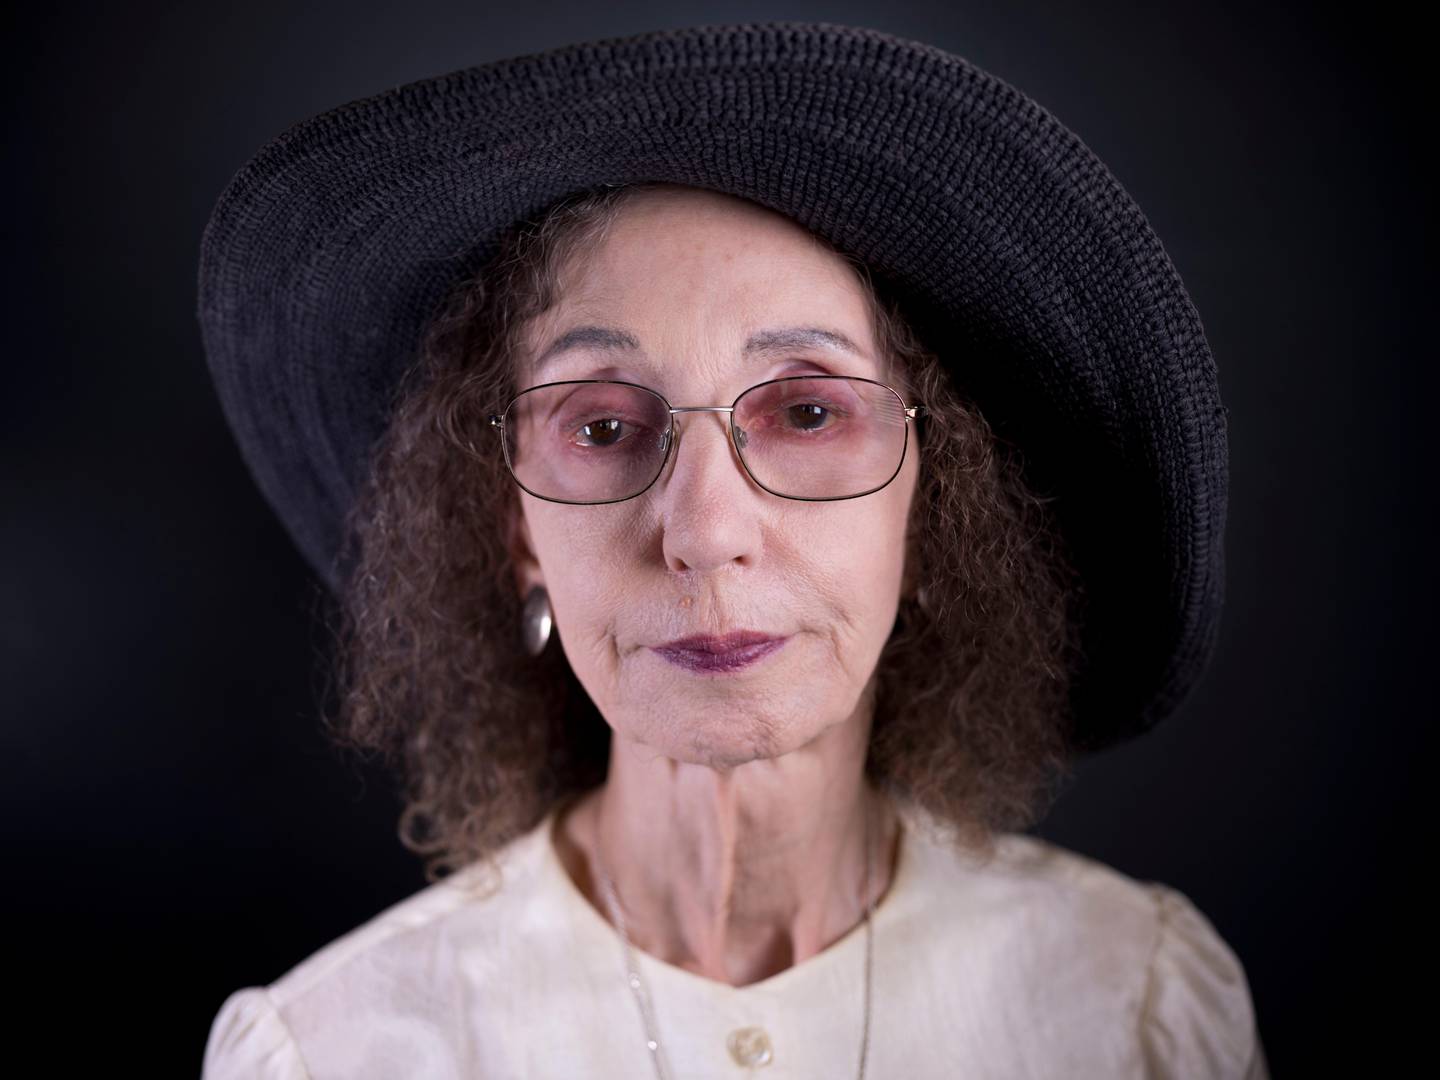 American author Joyce Carol Oates poses for a photo in Jerusalem, Sunday, May 12, 2019. Oates says her family?Äôs denial of its Jewish roots haunted her for decades and has shaped her into the famously prolific writer she is today. Oates, who is making her first-ever trip to Israel to receive the prestigious Jerusalem Prize, said that her Jewish grandmother fled persecution in her native Germany to rural upstate New York in the late 19th century. (AP Photo/Oded Balilty)